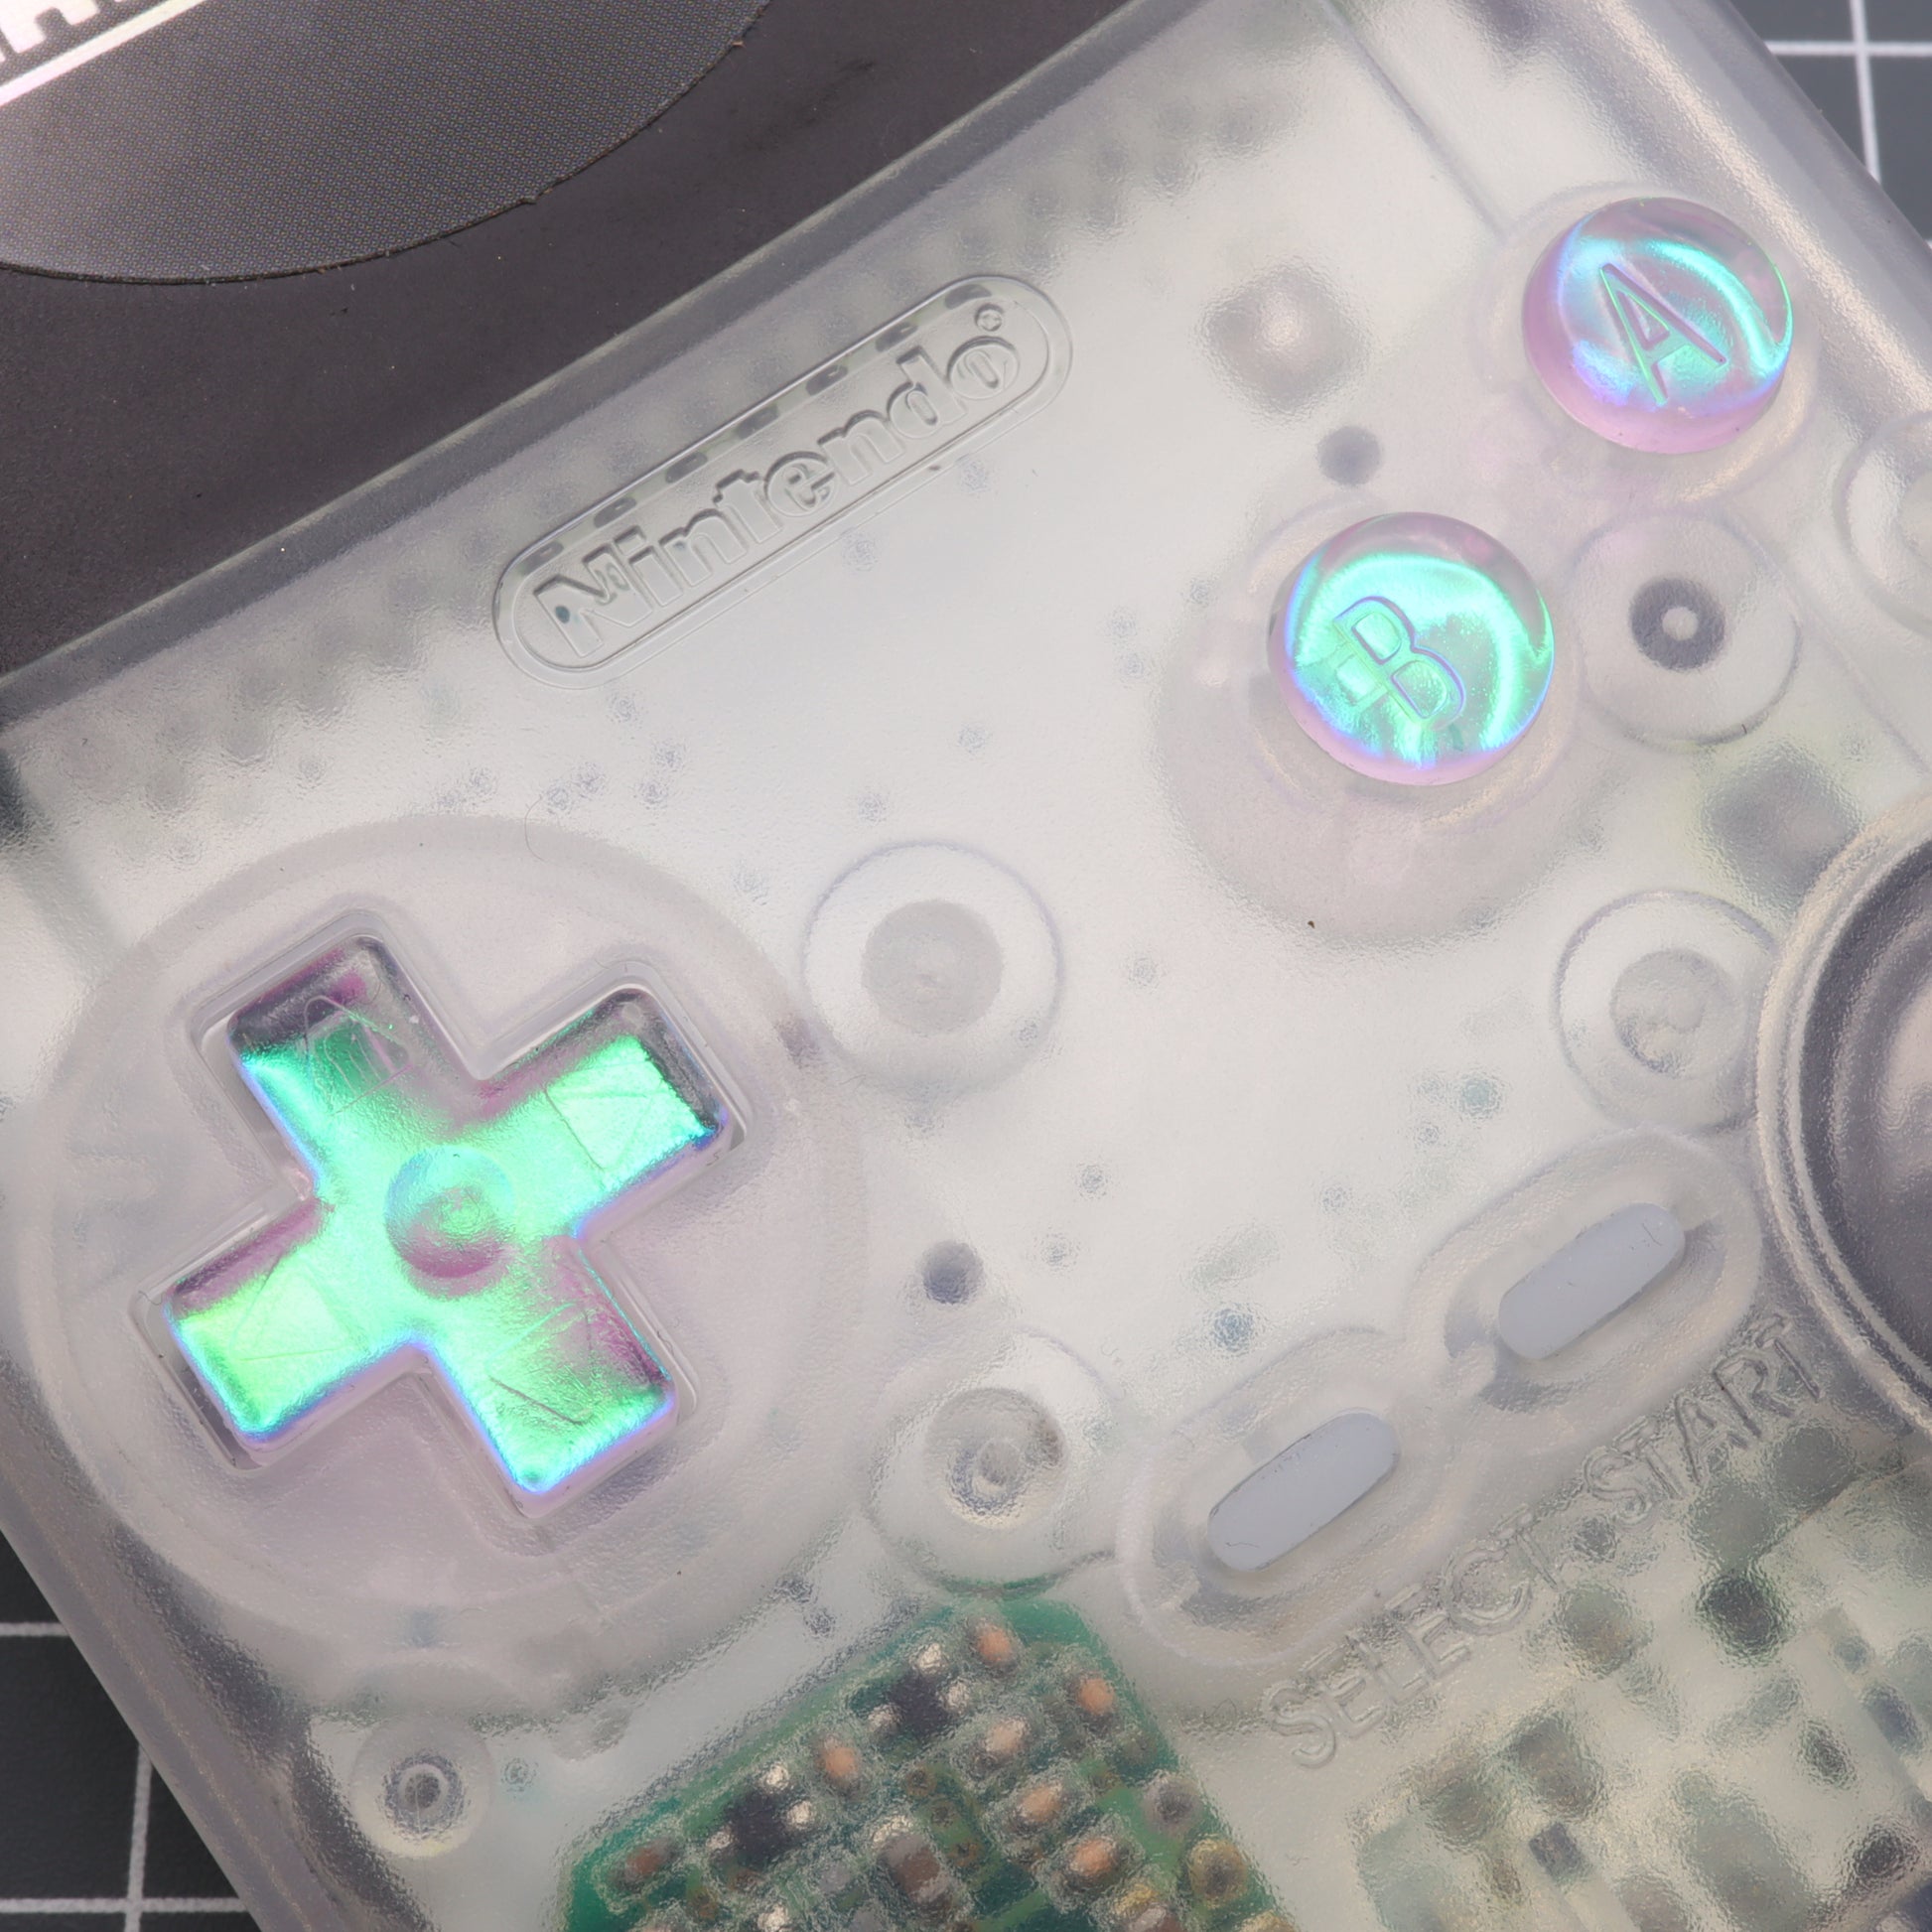 A labfifteen Game Boy Color - Custom Button - Cool Opal game controller is sitting on a table.